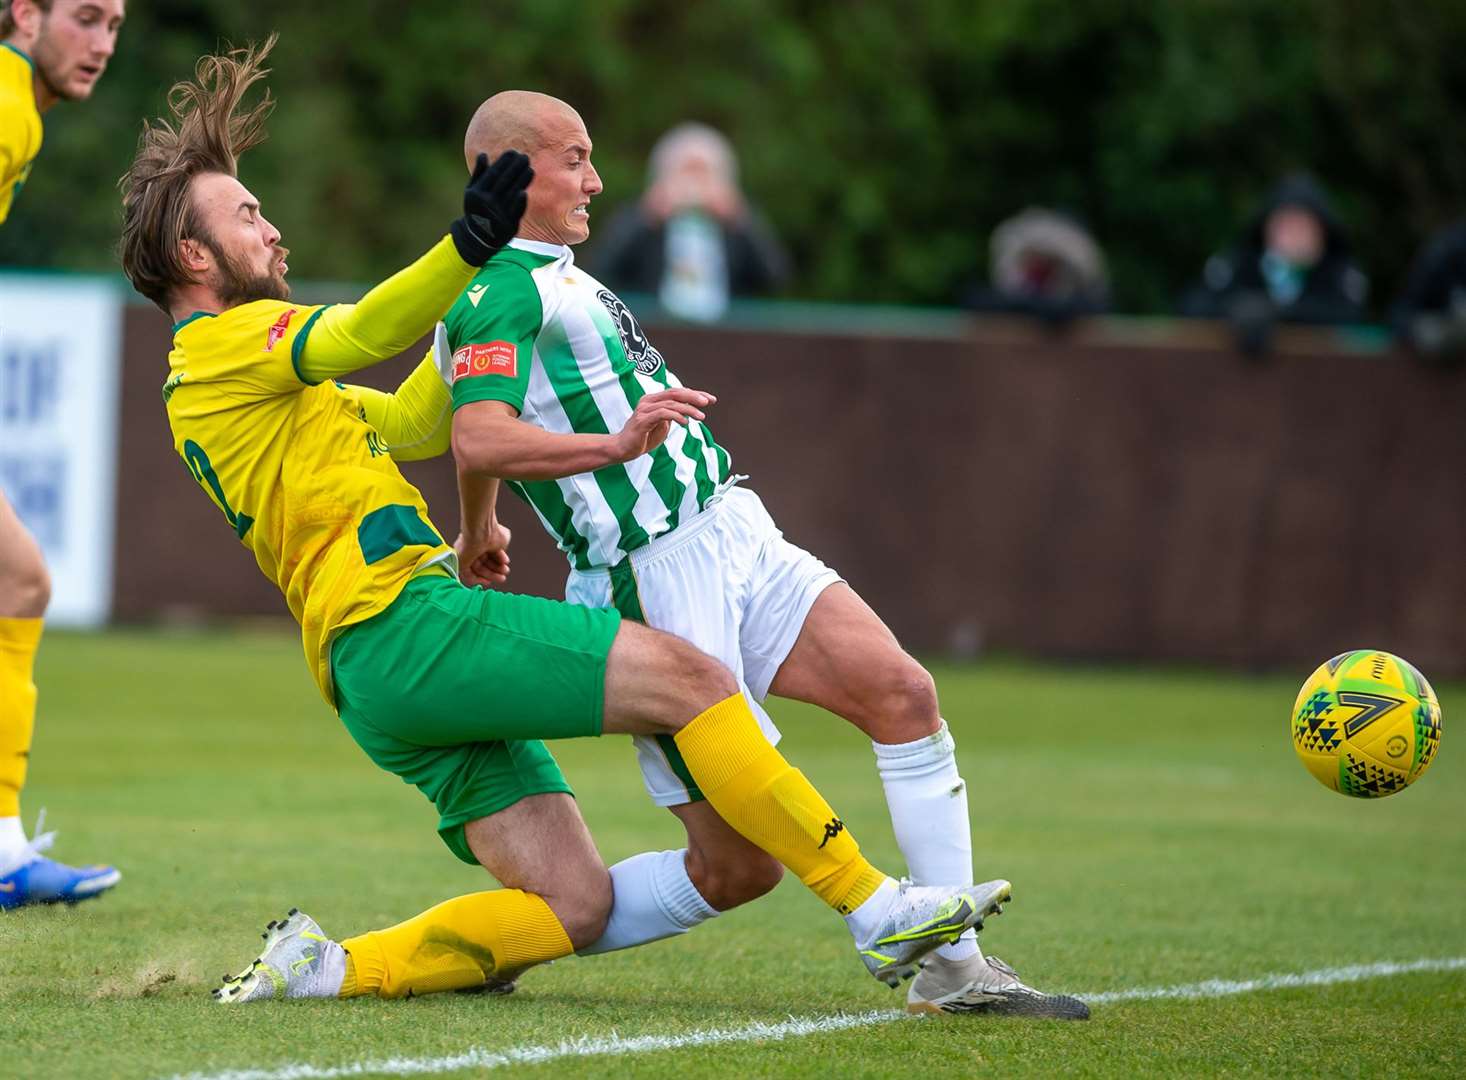 Substitute Luke Burdon gives Ashford the lead Picture: Ian Scammell